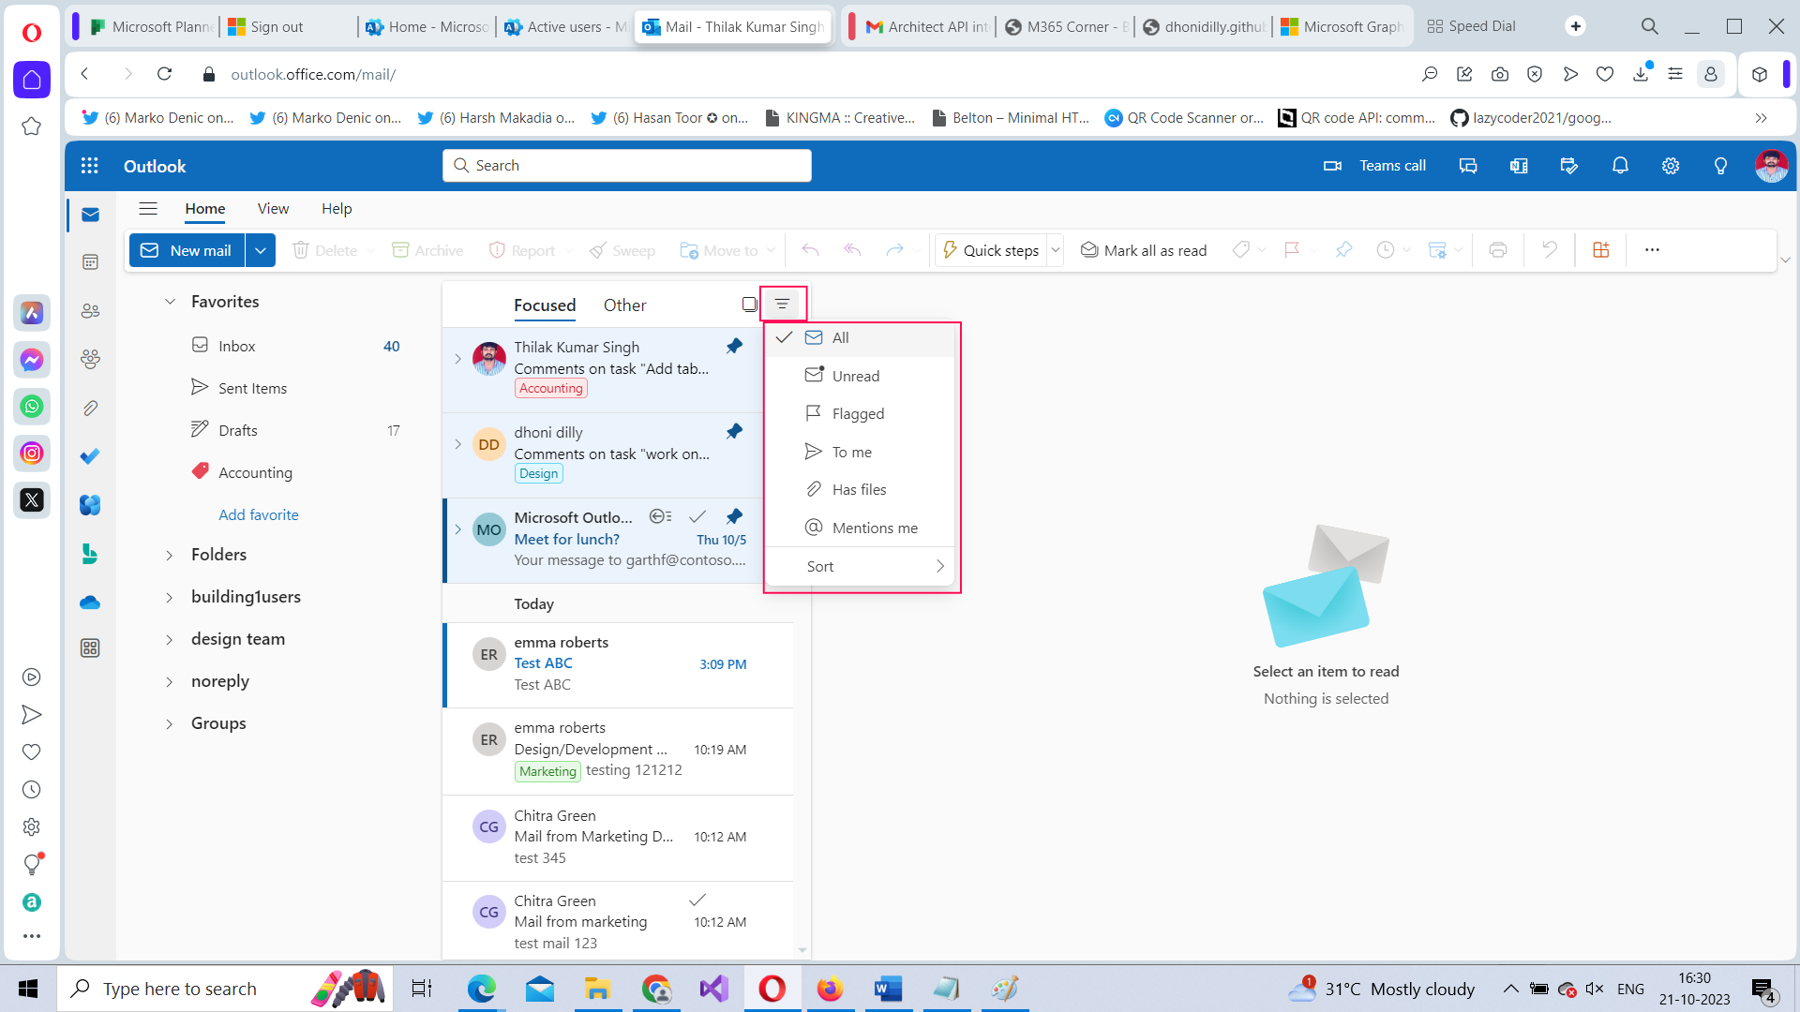 This screenshot shows the filter options available in Microsoft 365 outlook on the web. 